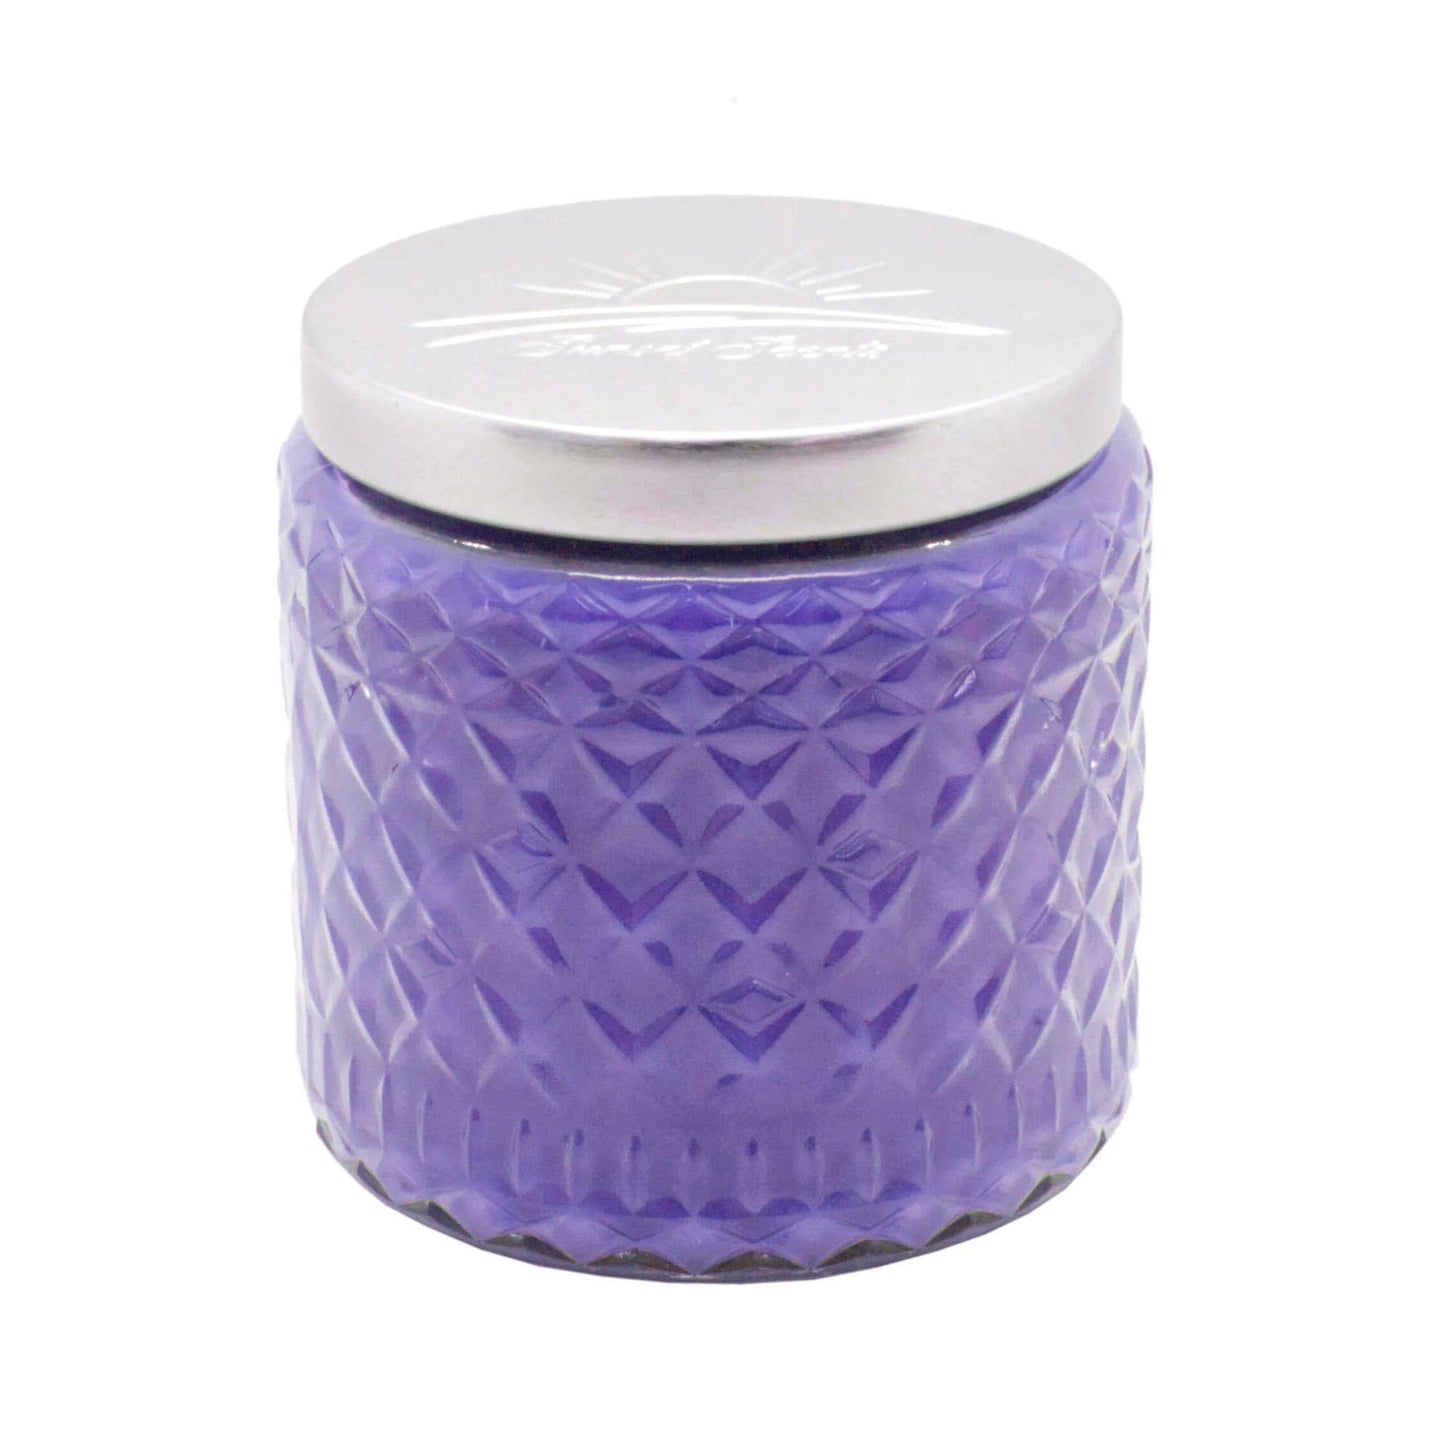 Coco Berry Bliss Scented Candle - Medium 16oz